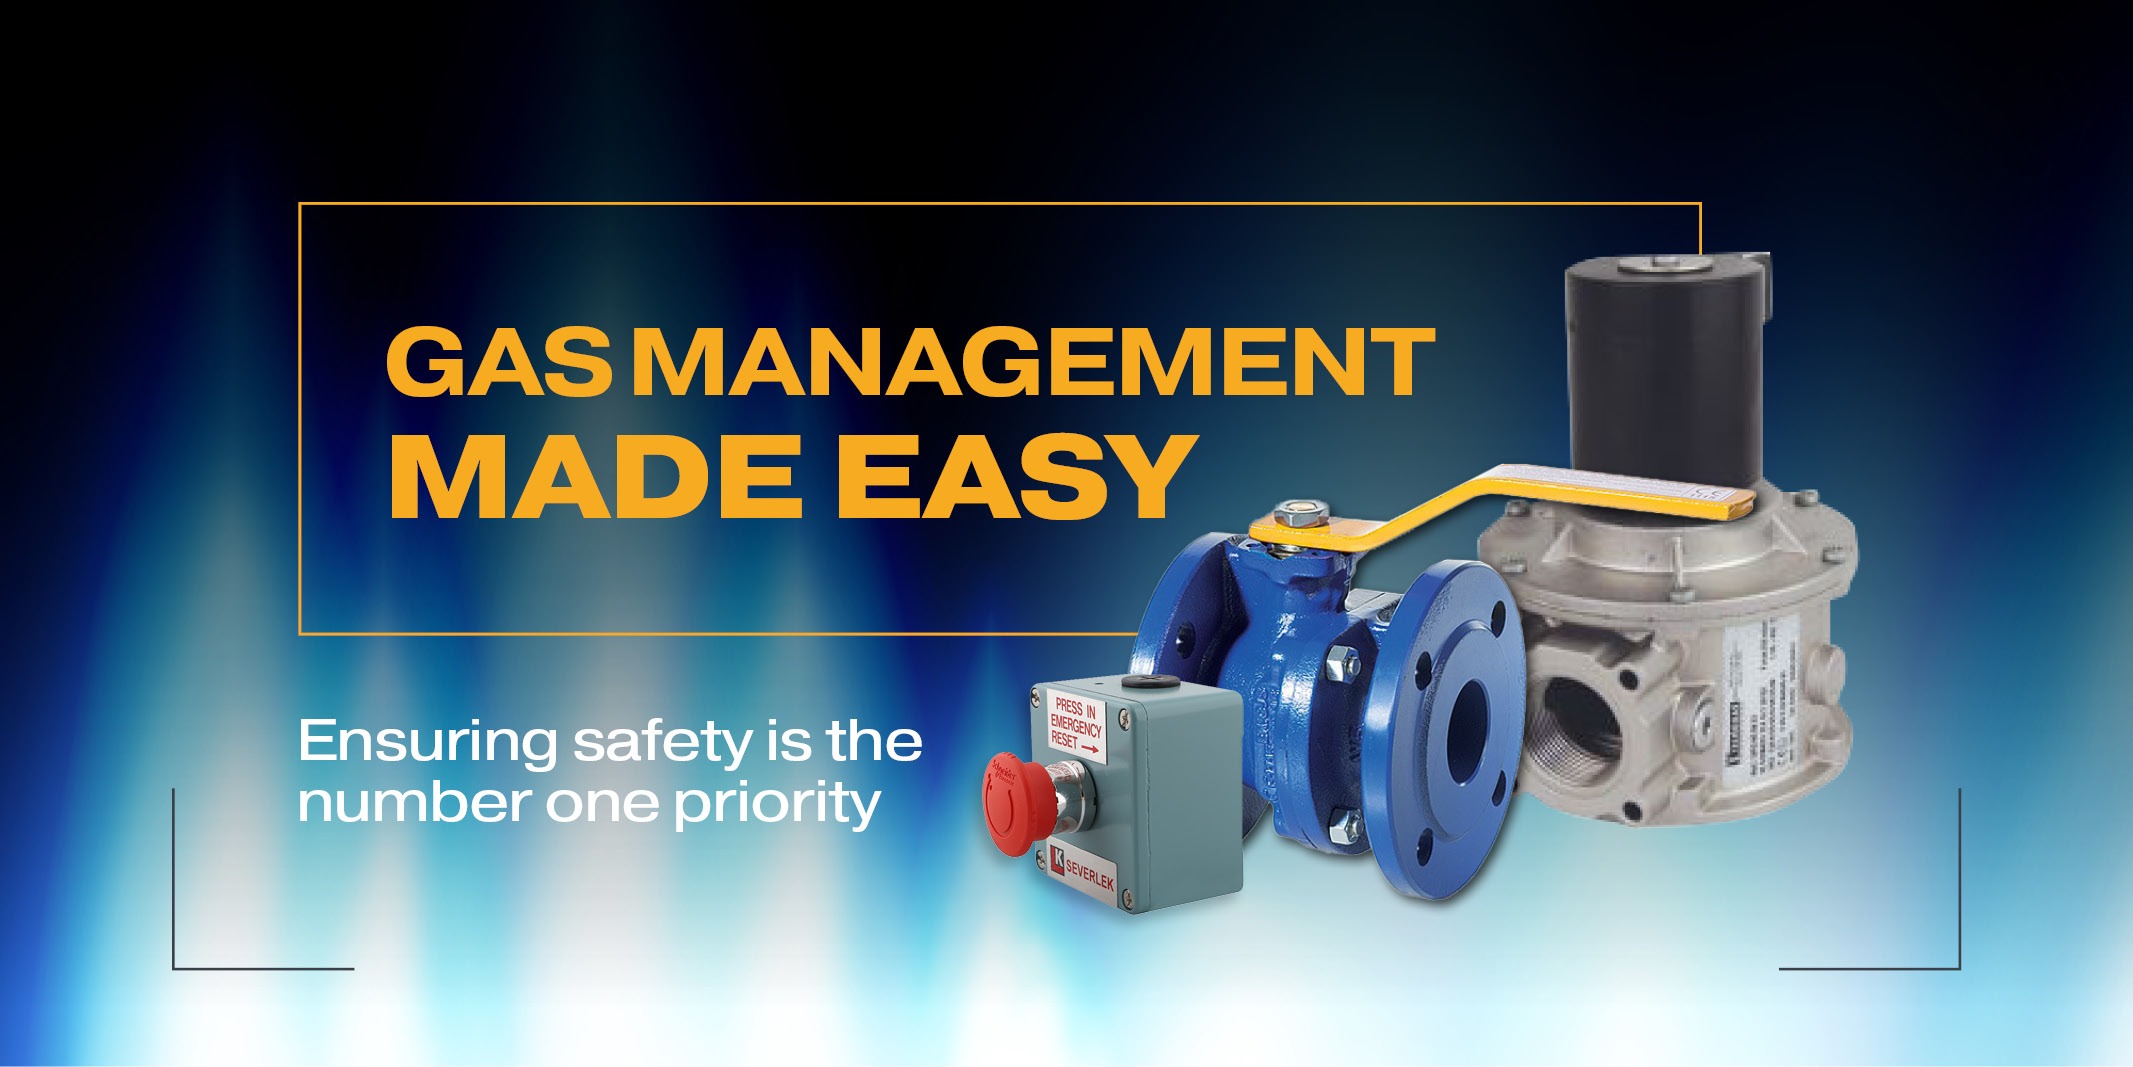 Gas Management is Made Easy with Landon Kingsway Landon Kingsway Gas equipment management